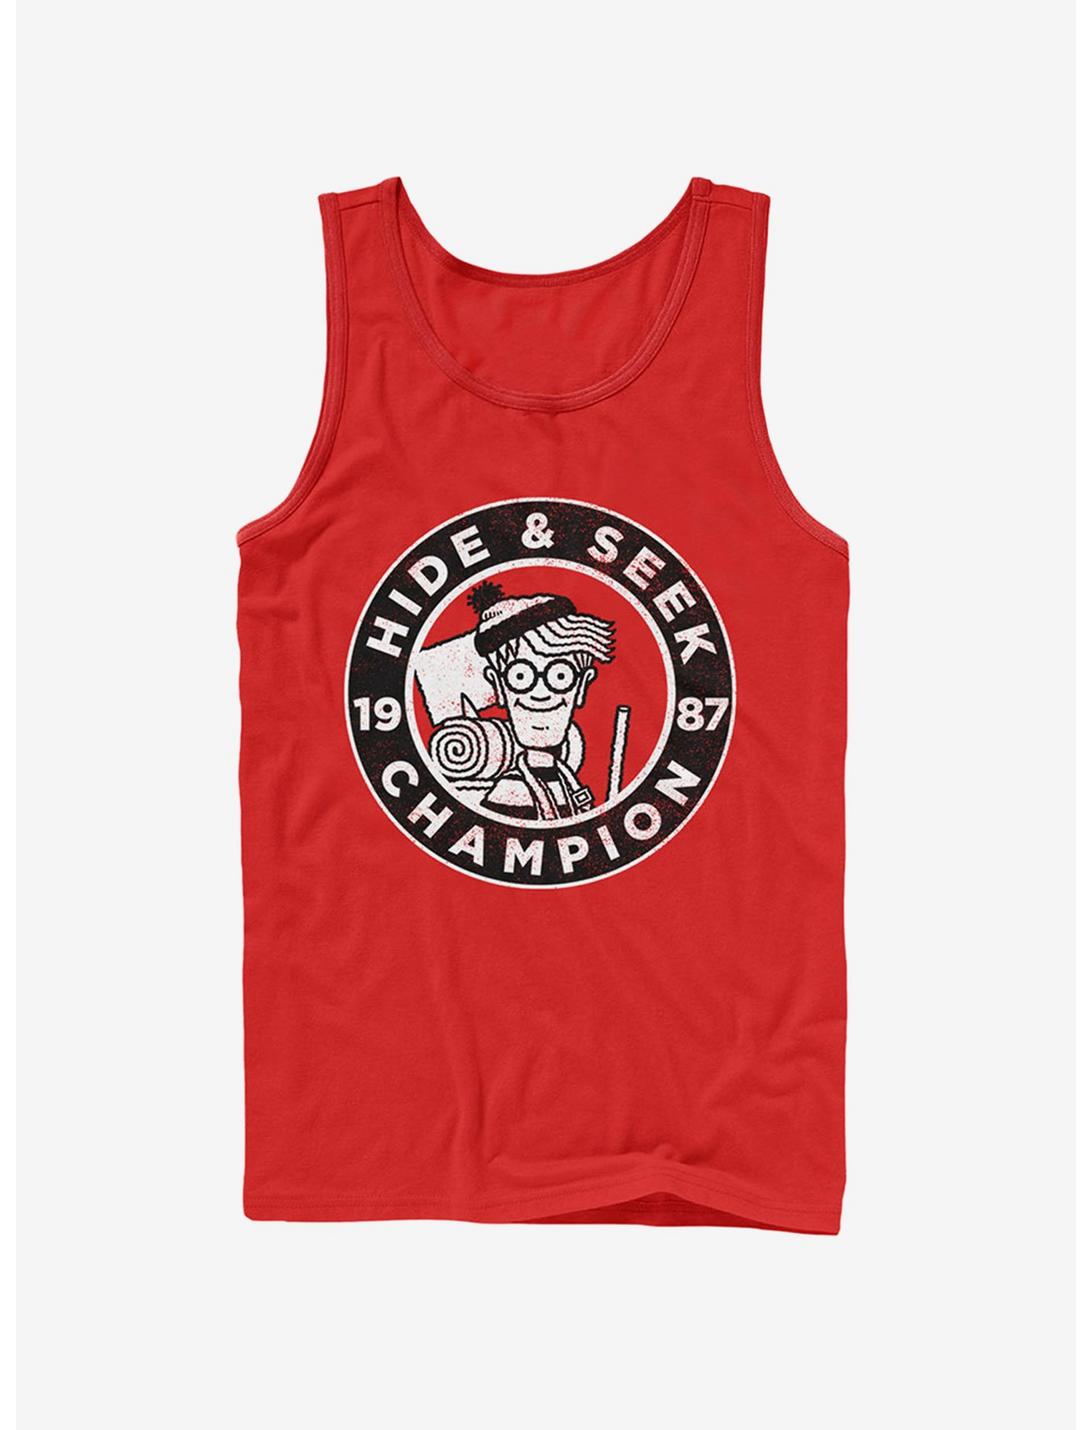 Where's Waldo Hide and Seek Champion Tank Top, RED, hi-res